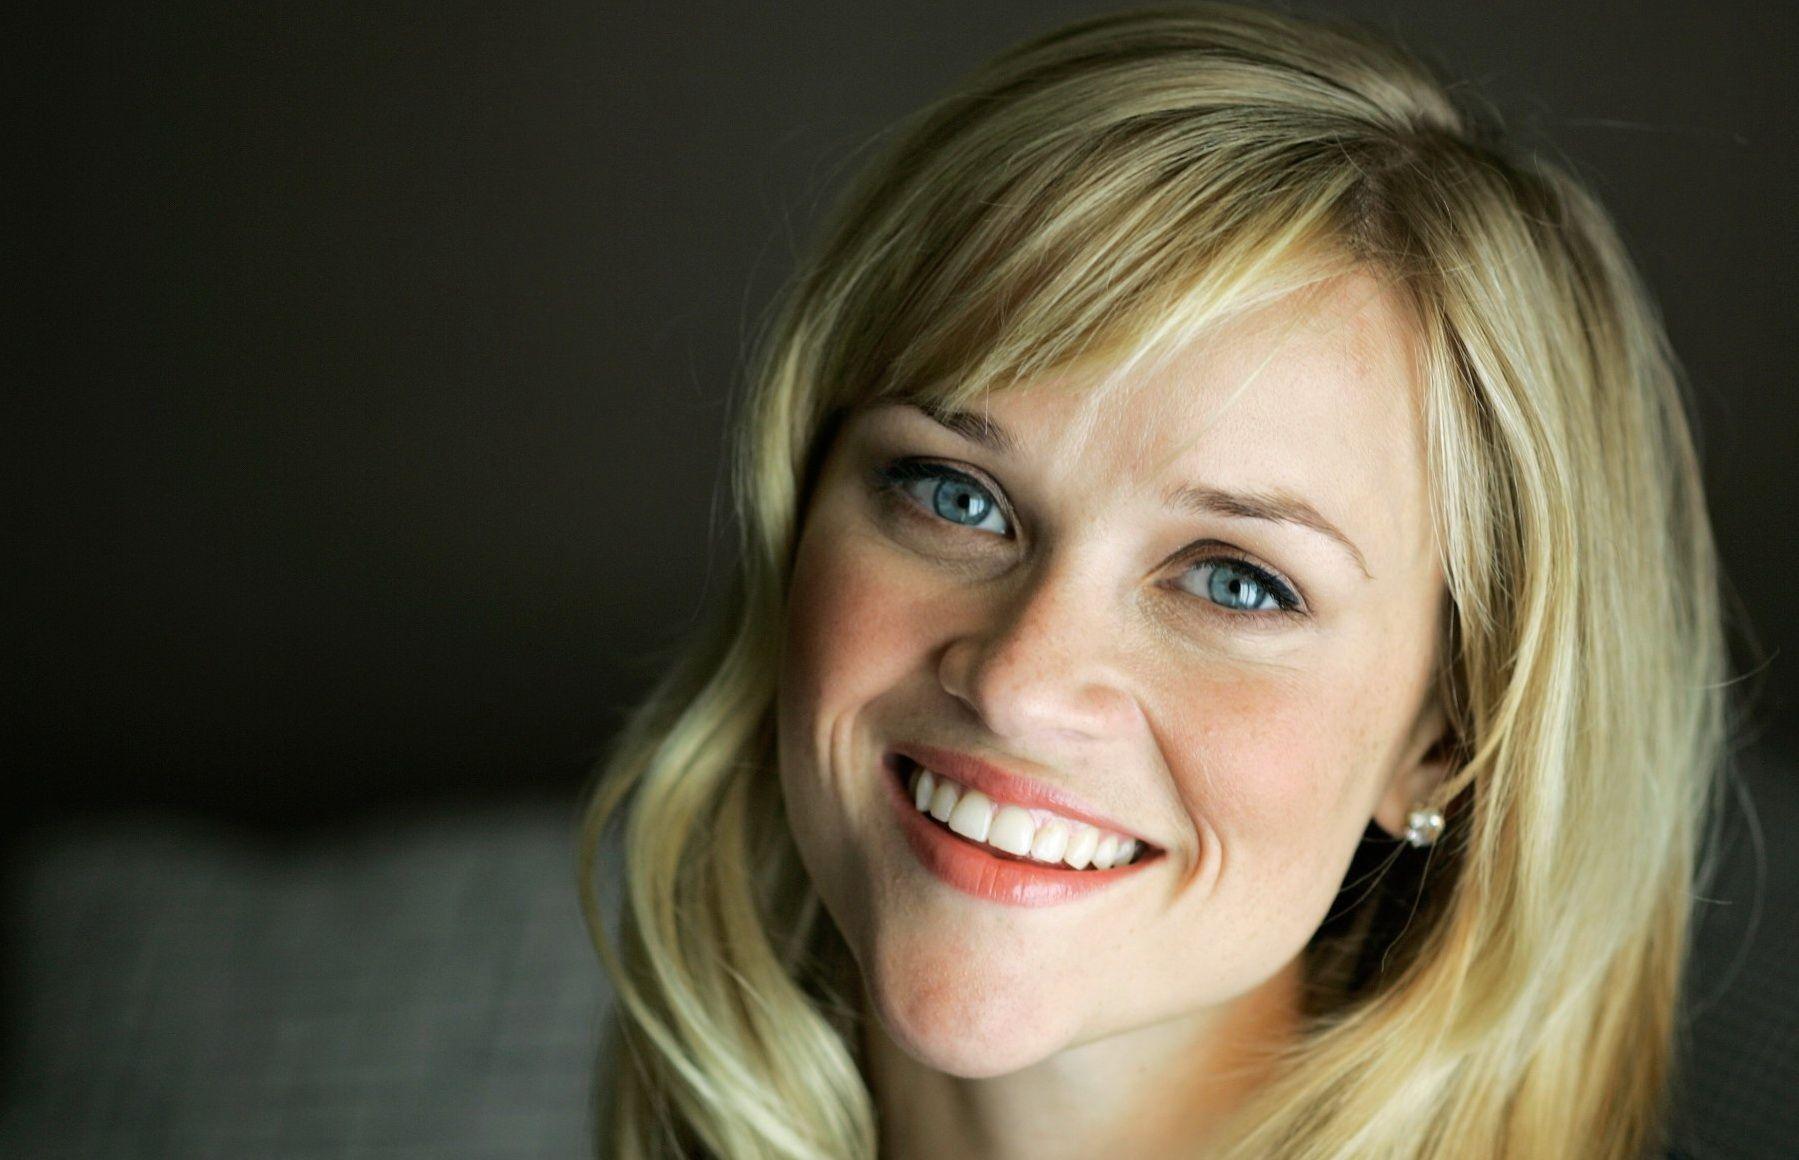 Reese Witherspoon HD Wallpaper for desktop download